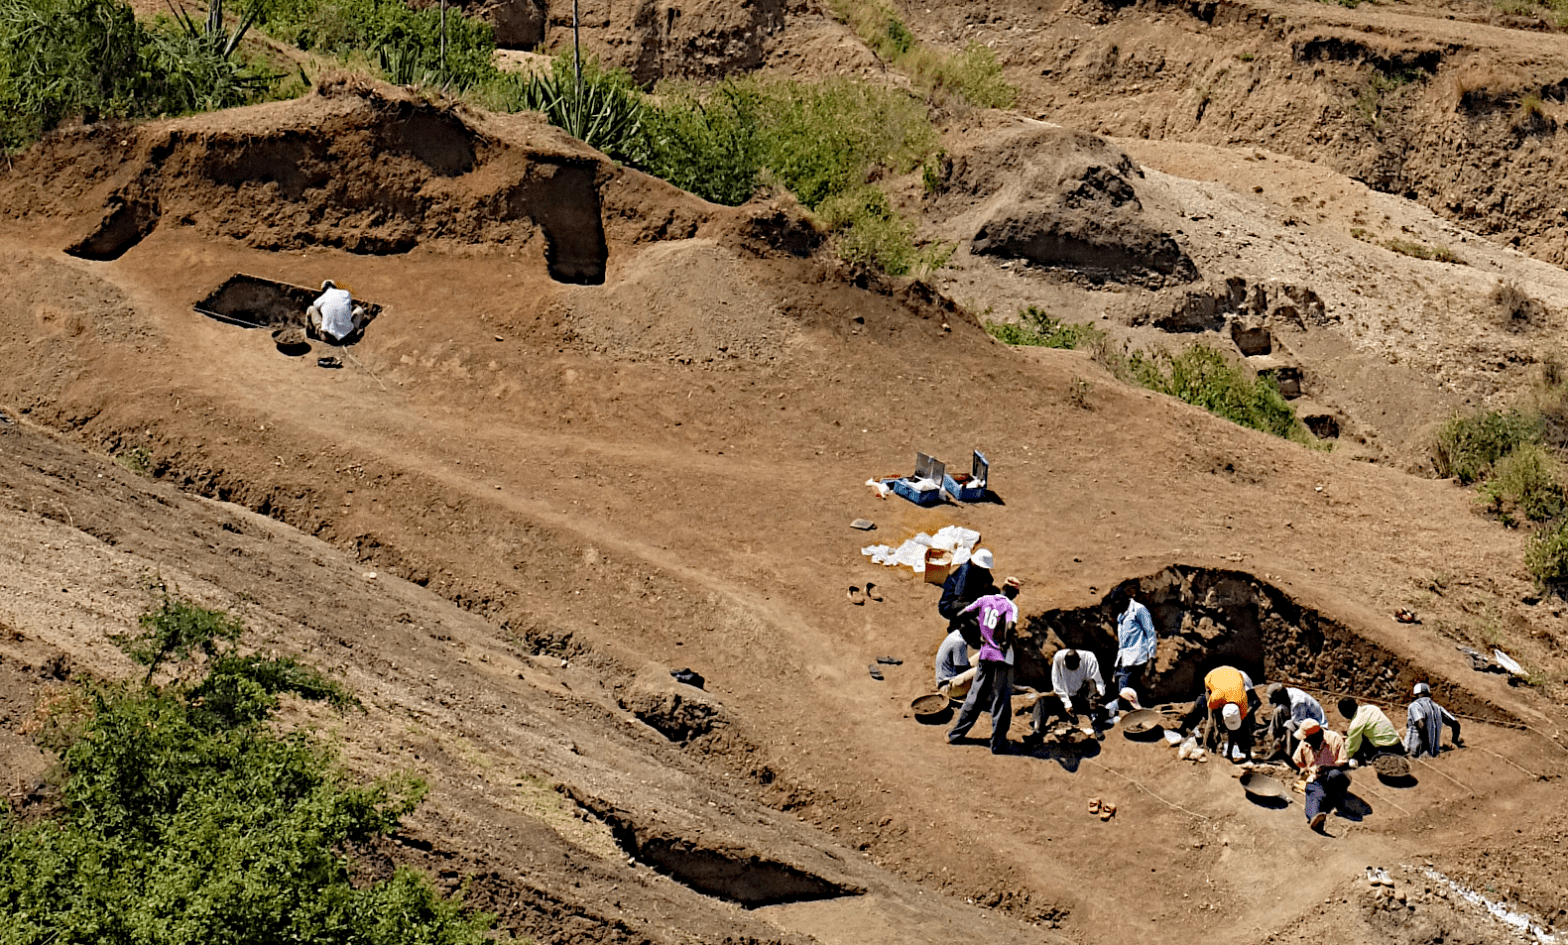 The excavation team working on a site in Nyayanga, Kenya. (Photo: J.S. Oliver, Homa Peninsula Paleoanthropology Project)